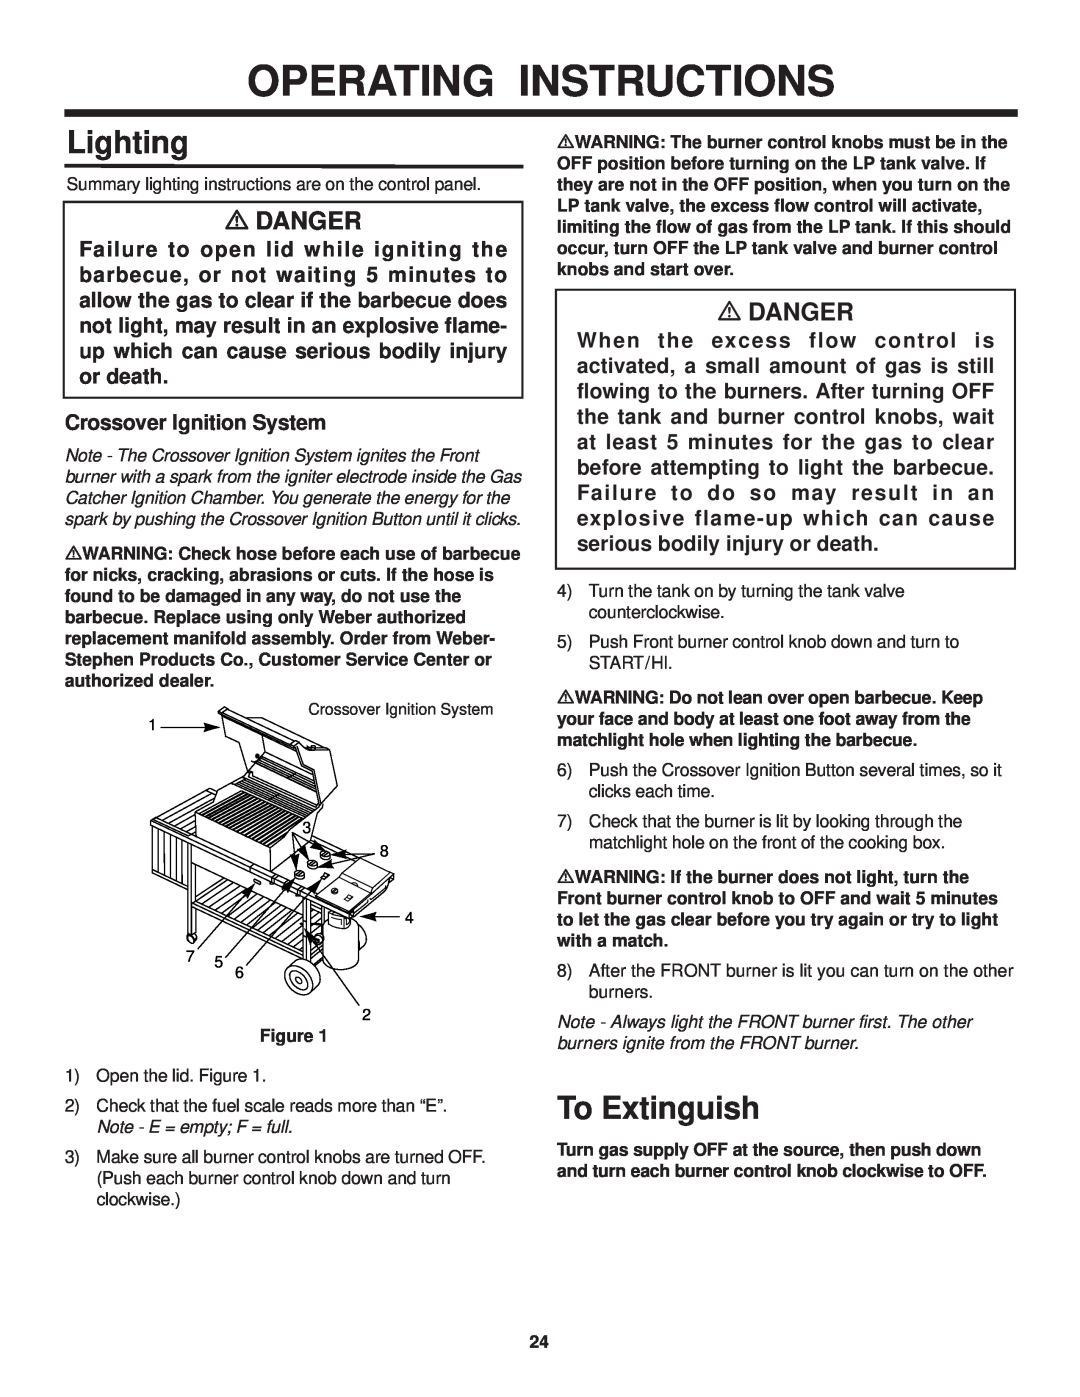 Weber 98642 owner manual Operating Instructions, Lighting, To Extinguish, mDANGER, Crossover Ignition System 